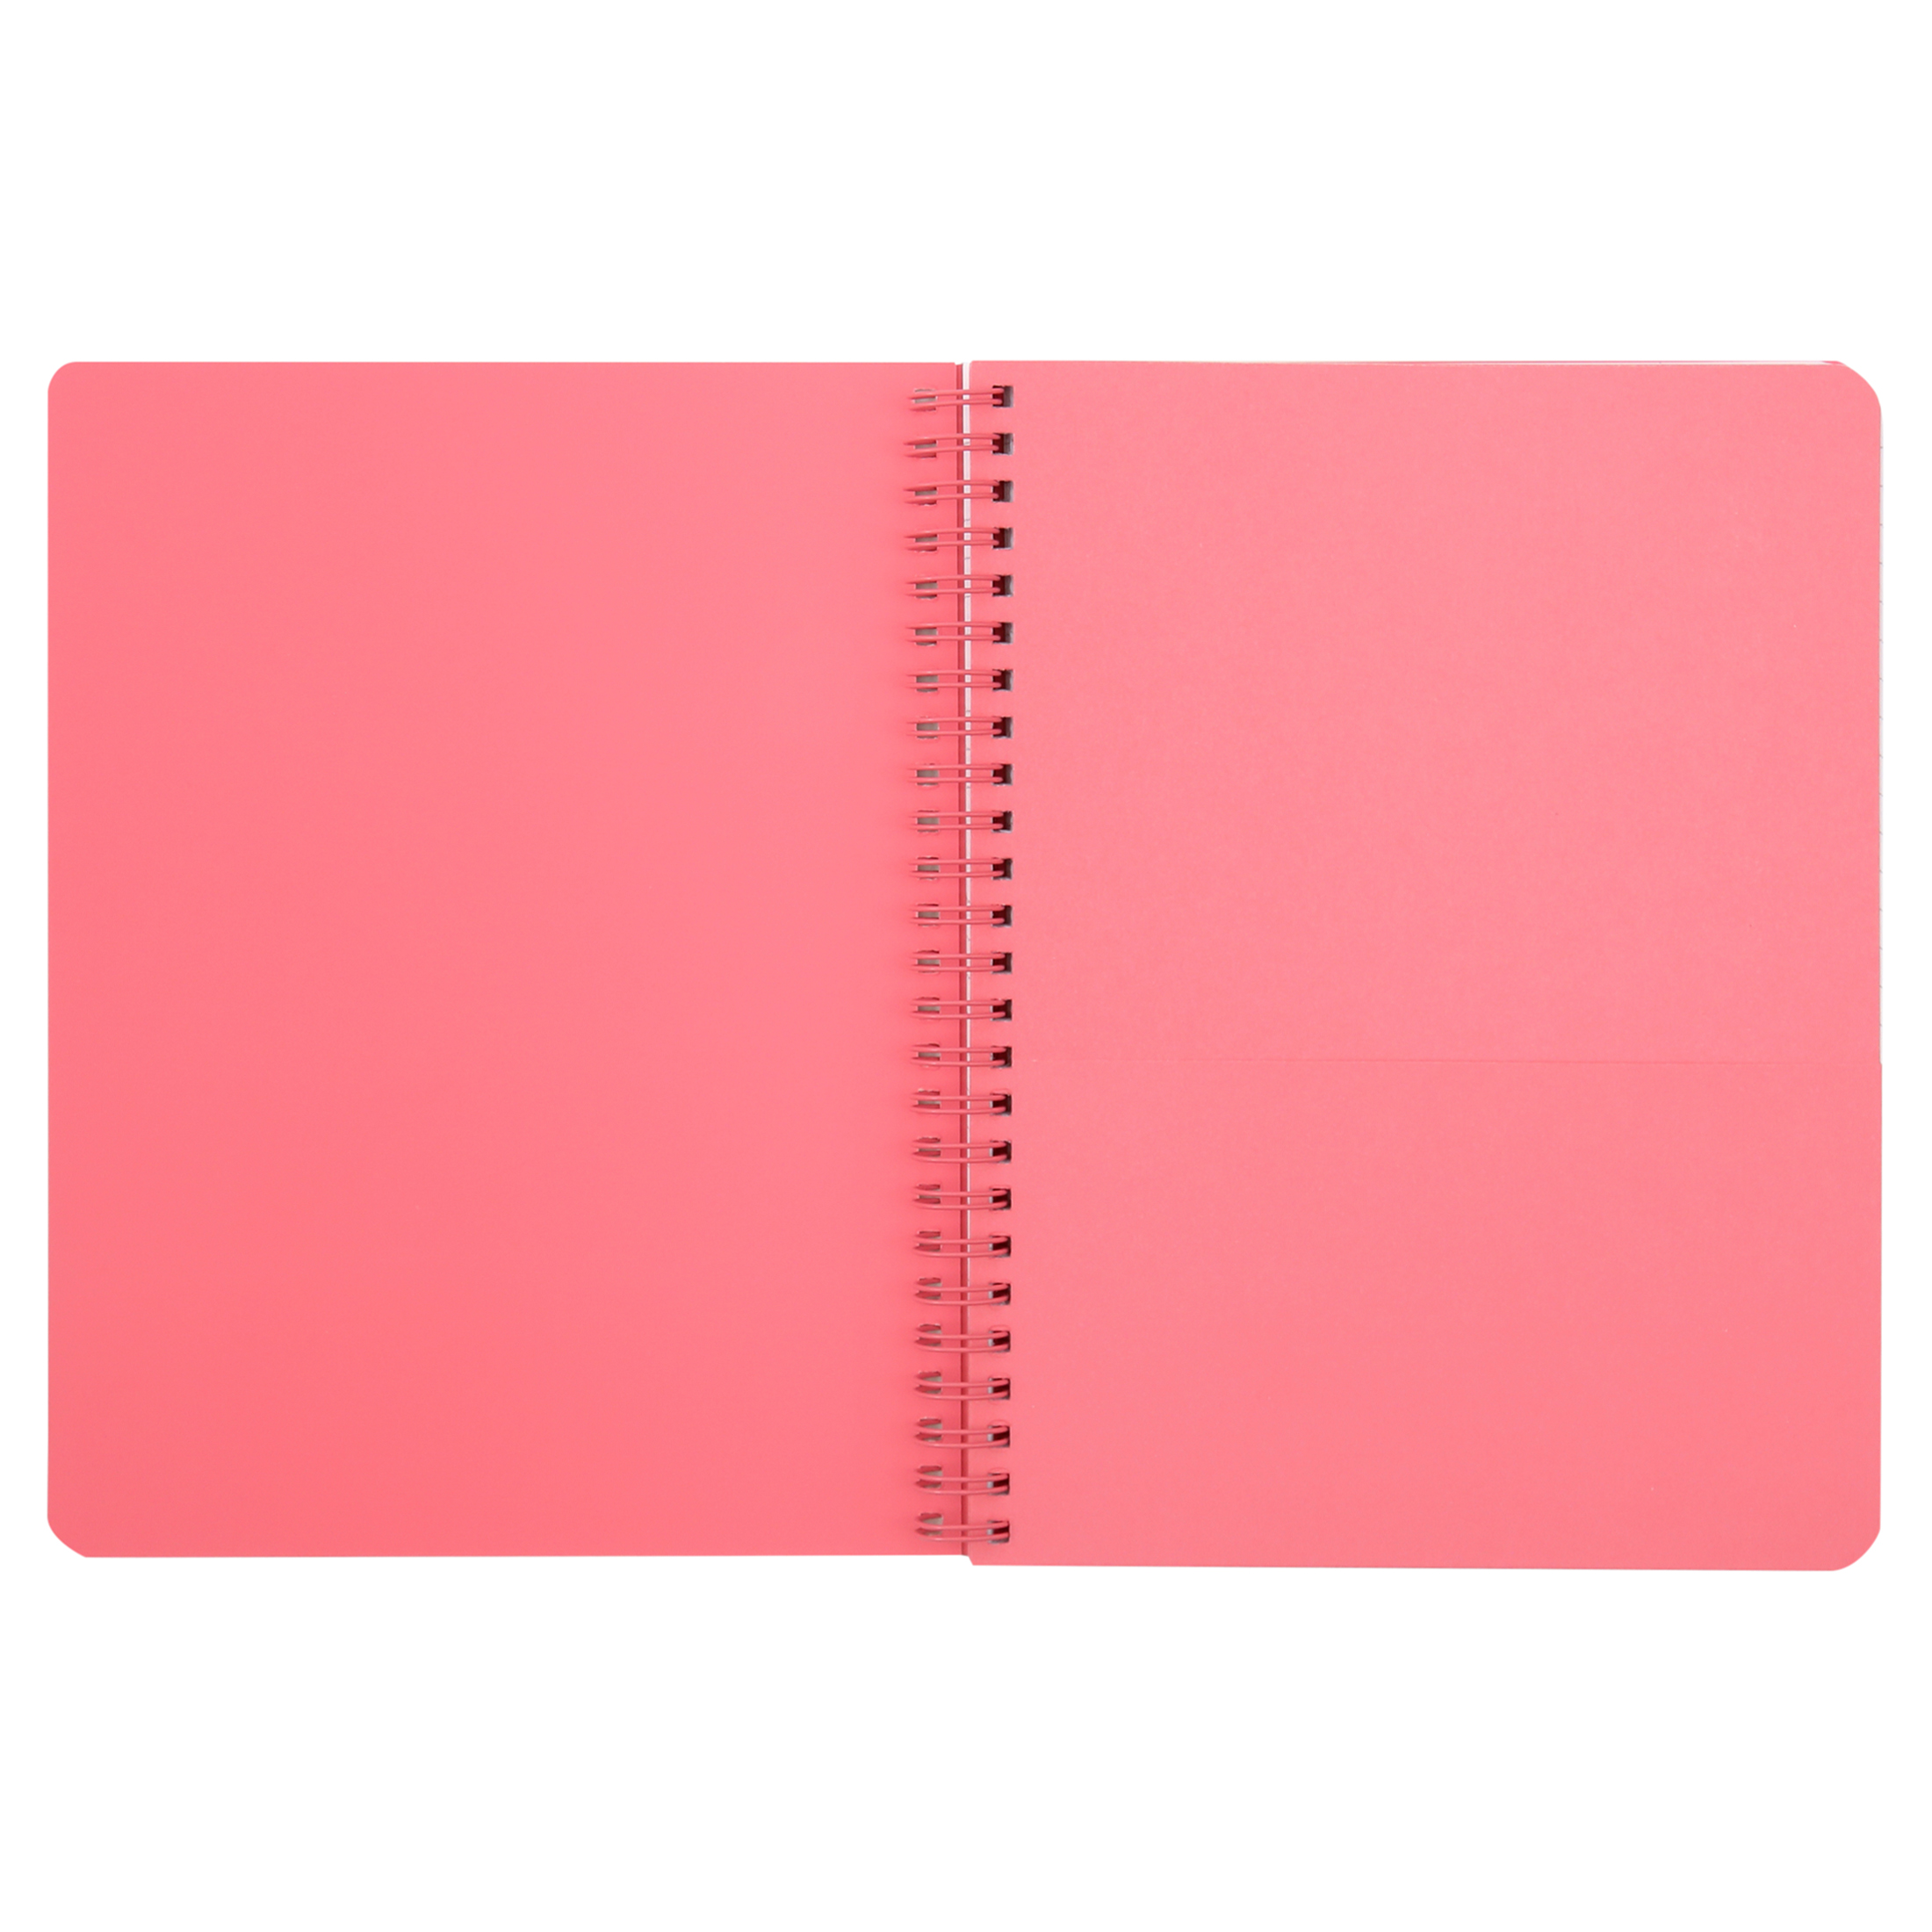 Ban.Do Mini Spiral Notebook, 9x7 with Pockets, 160 Pages, Secret Garden - image 3 of 6